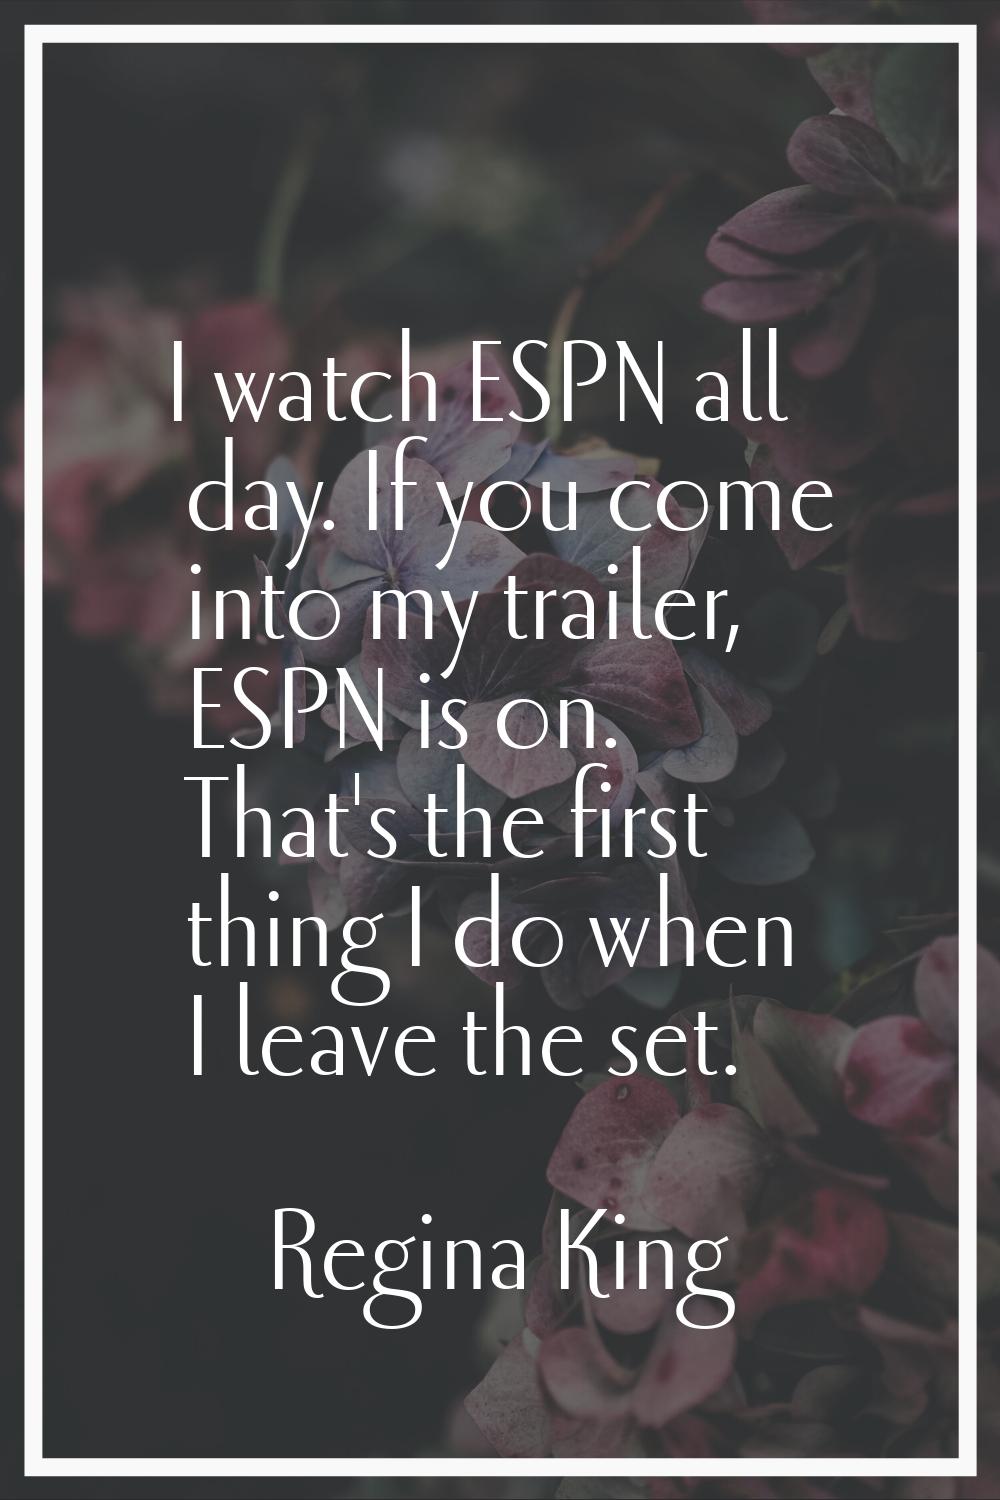 I watch ESPN all day. If you come into my trailer, ESPN is on. That's the first thing I do when I l